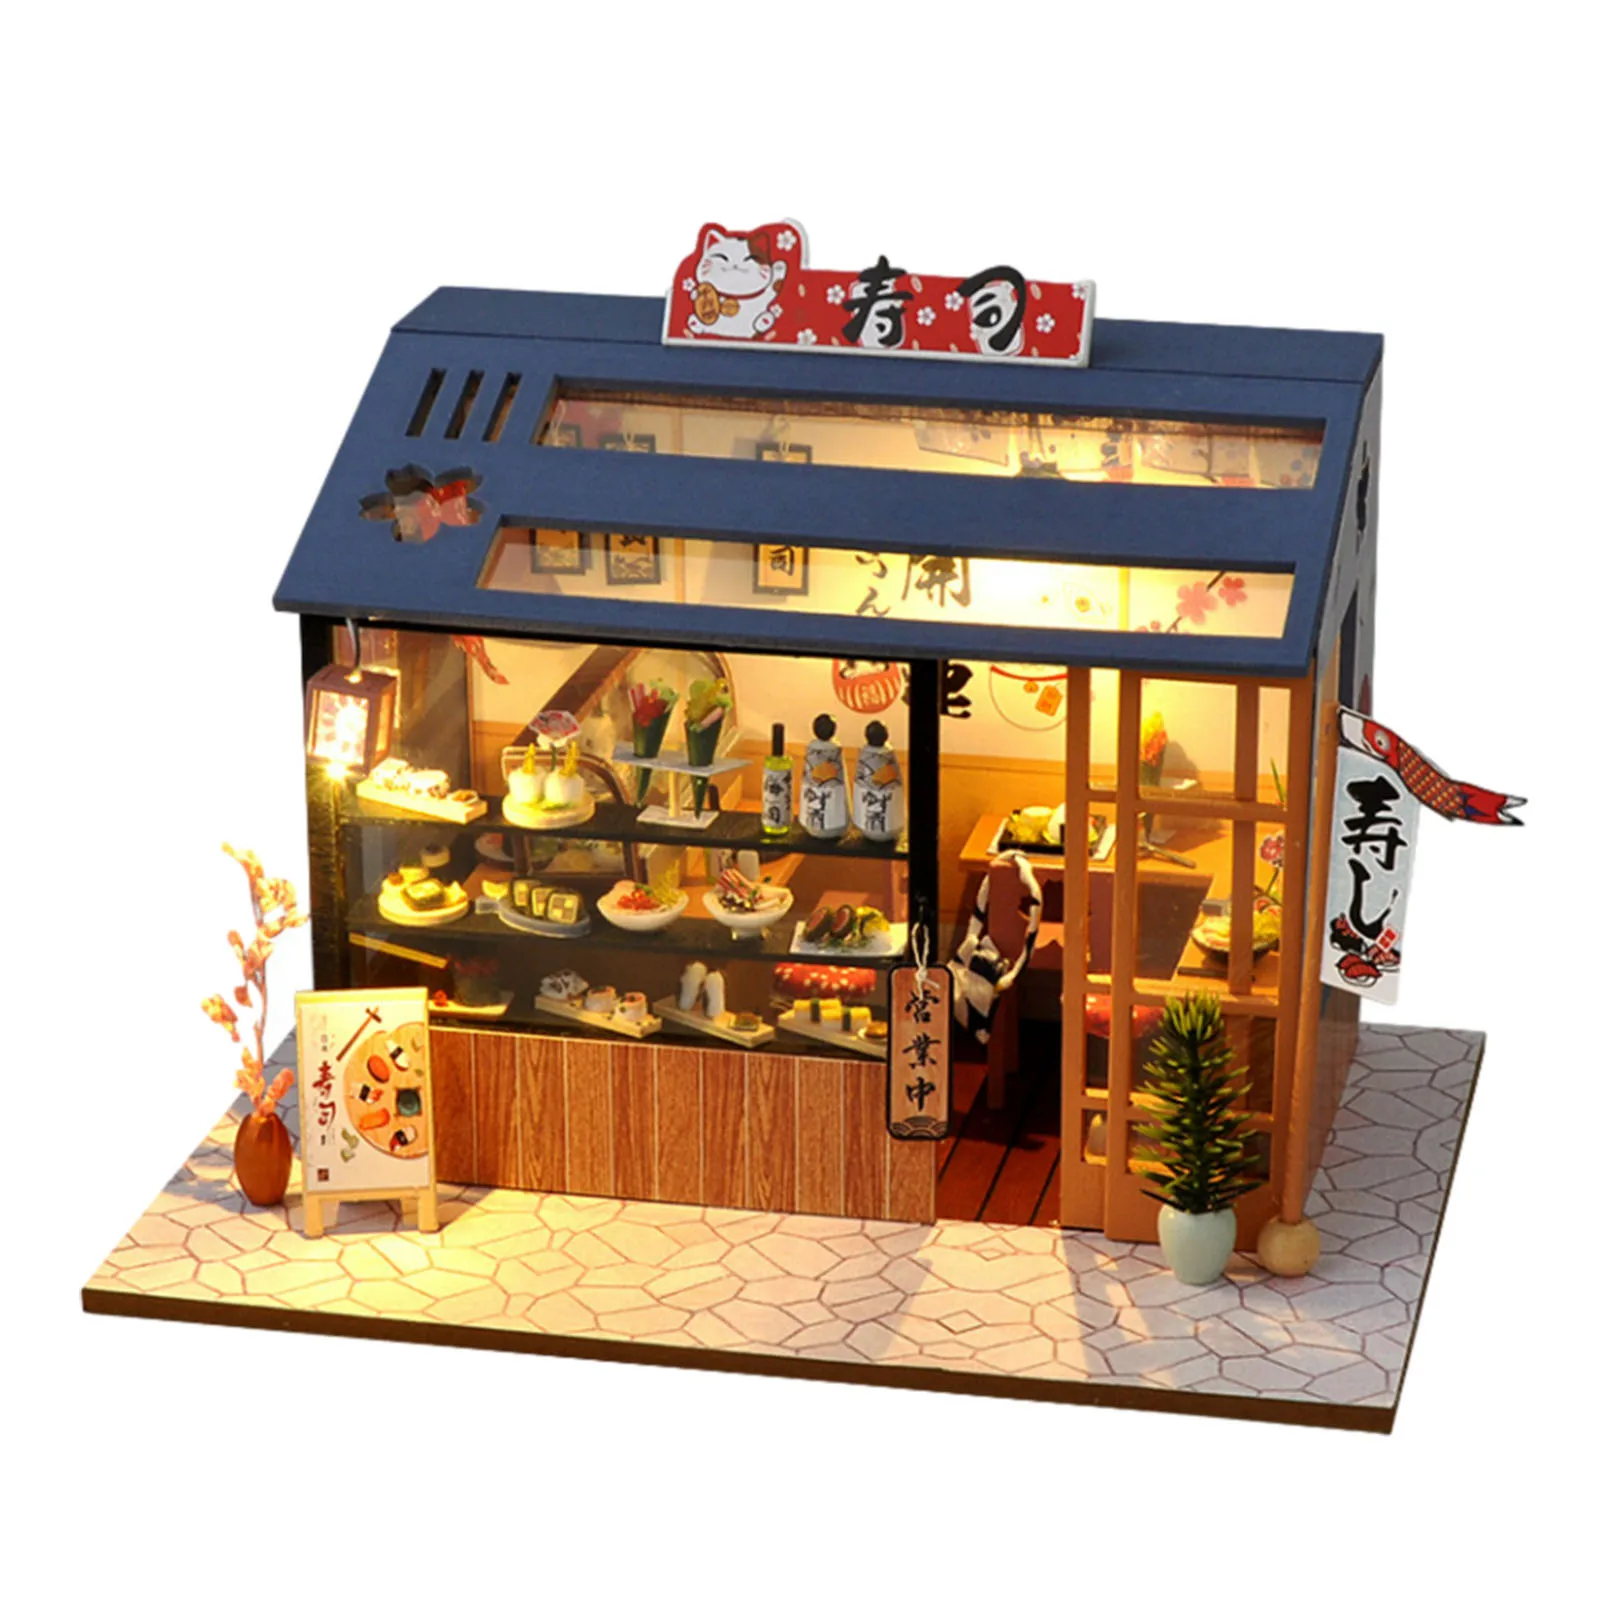 Japanese Doll House Miniature DIY Dollhouse Simulation Sushi Shop Model Toy Wooden Furnitures Children Toy Dollhouse Accessories wooden fence double lift bridge overpass train tracks railway toys set accessories model kid s gifts